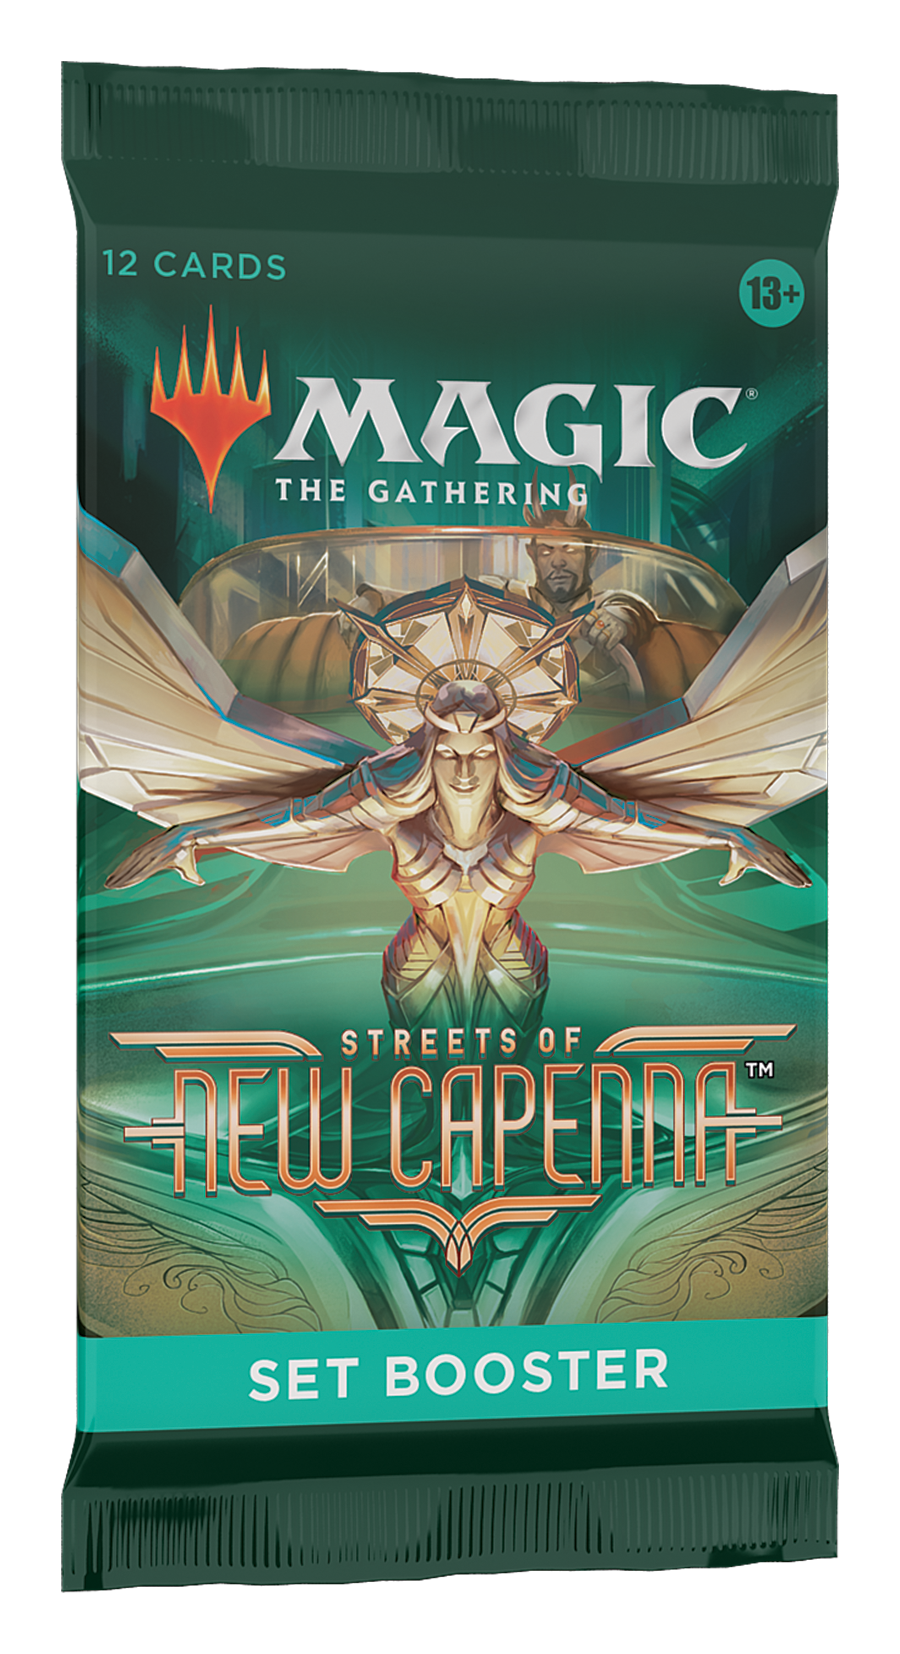 Magic the Gathering: Streets of New Capenna: Set Booster Display